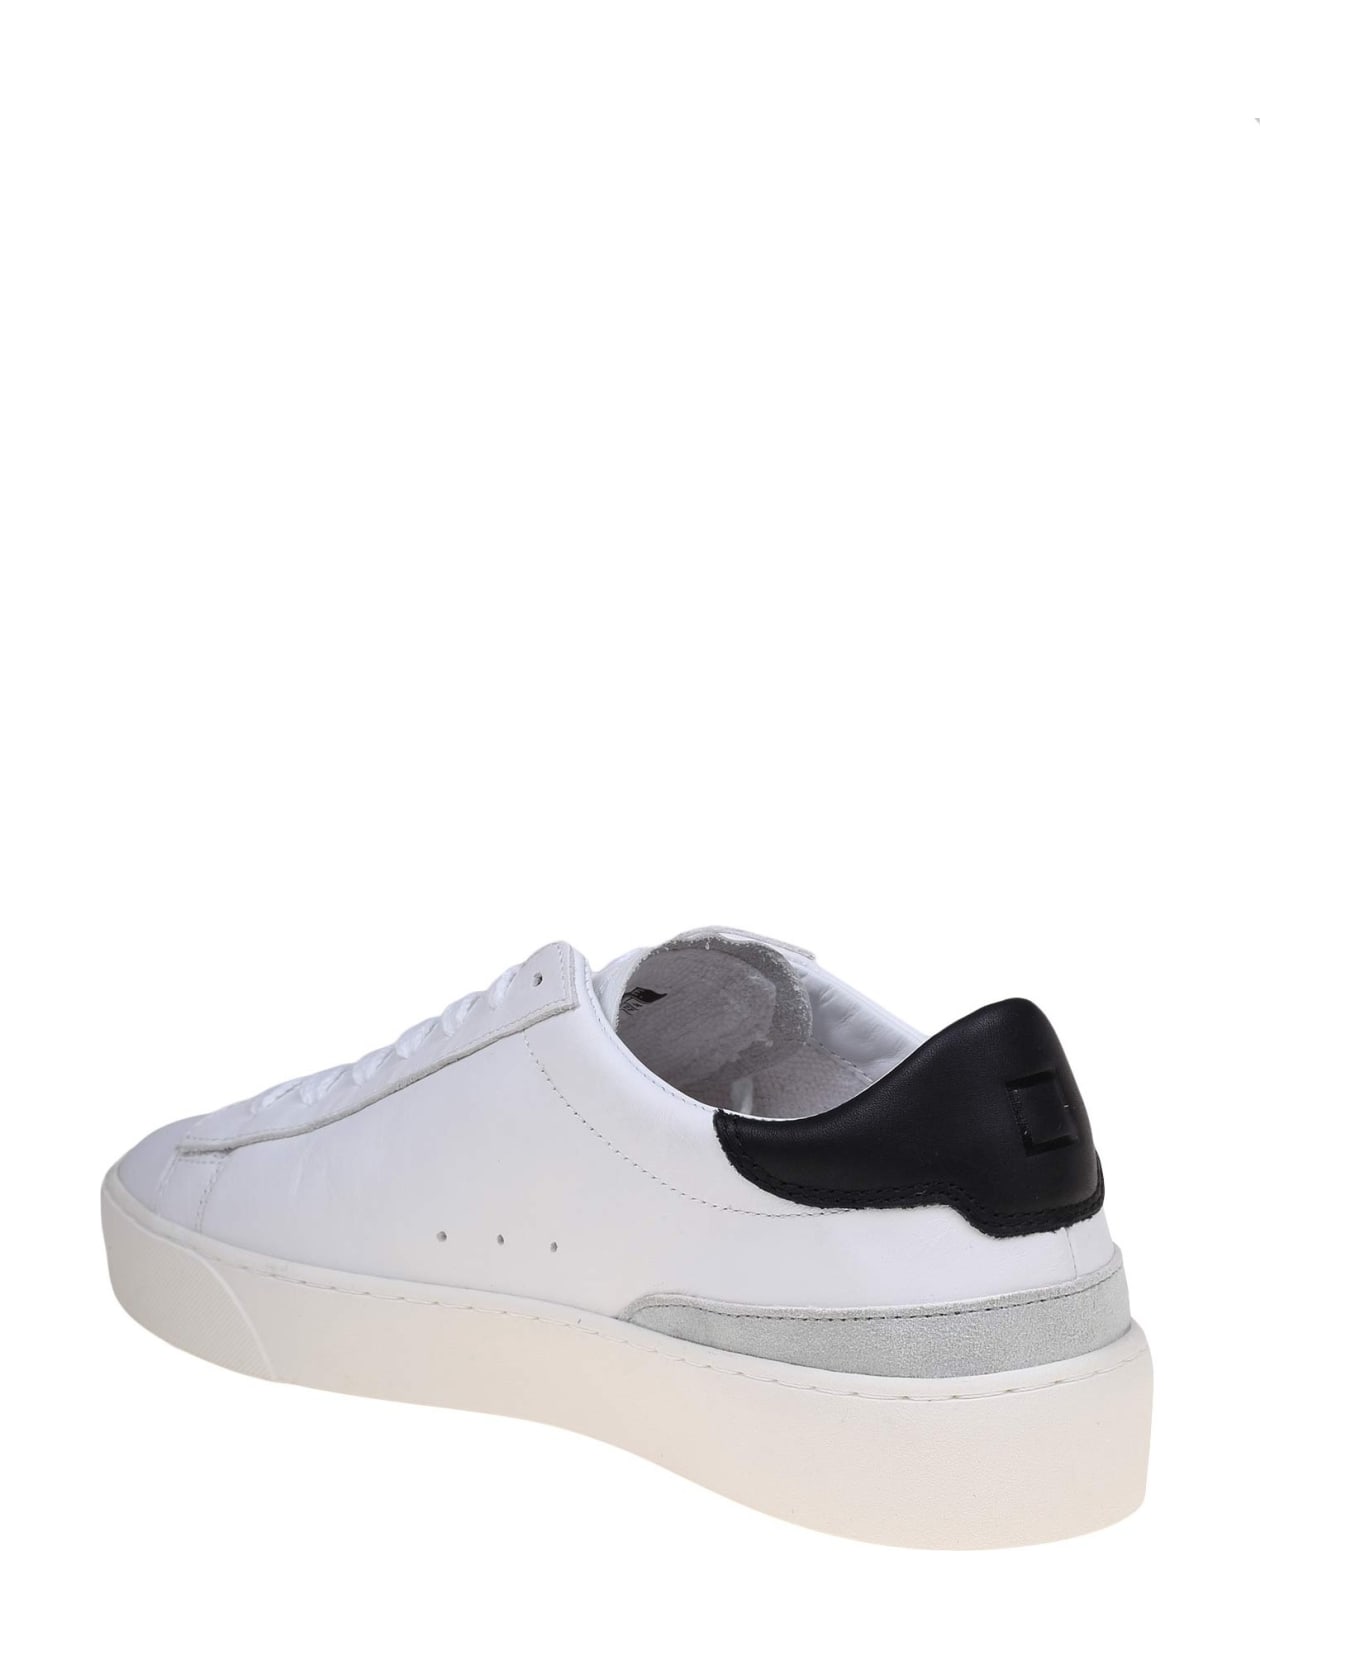 D.A.T.E. Sonica Sneakers In White/black Leather - White/Black スニーカー